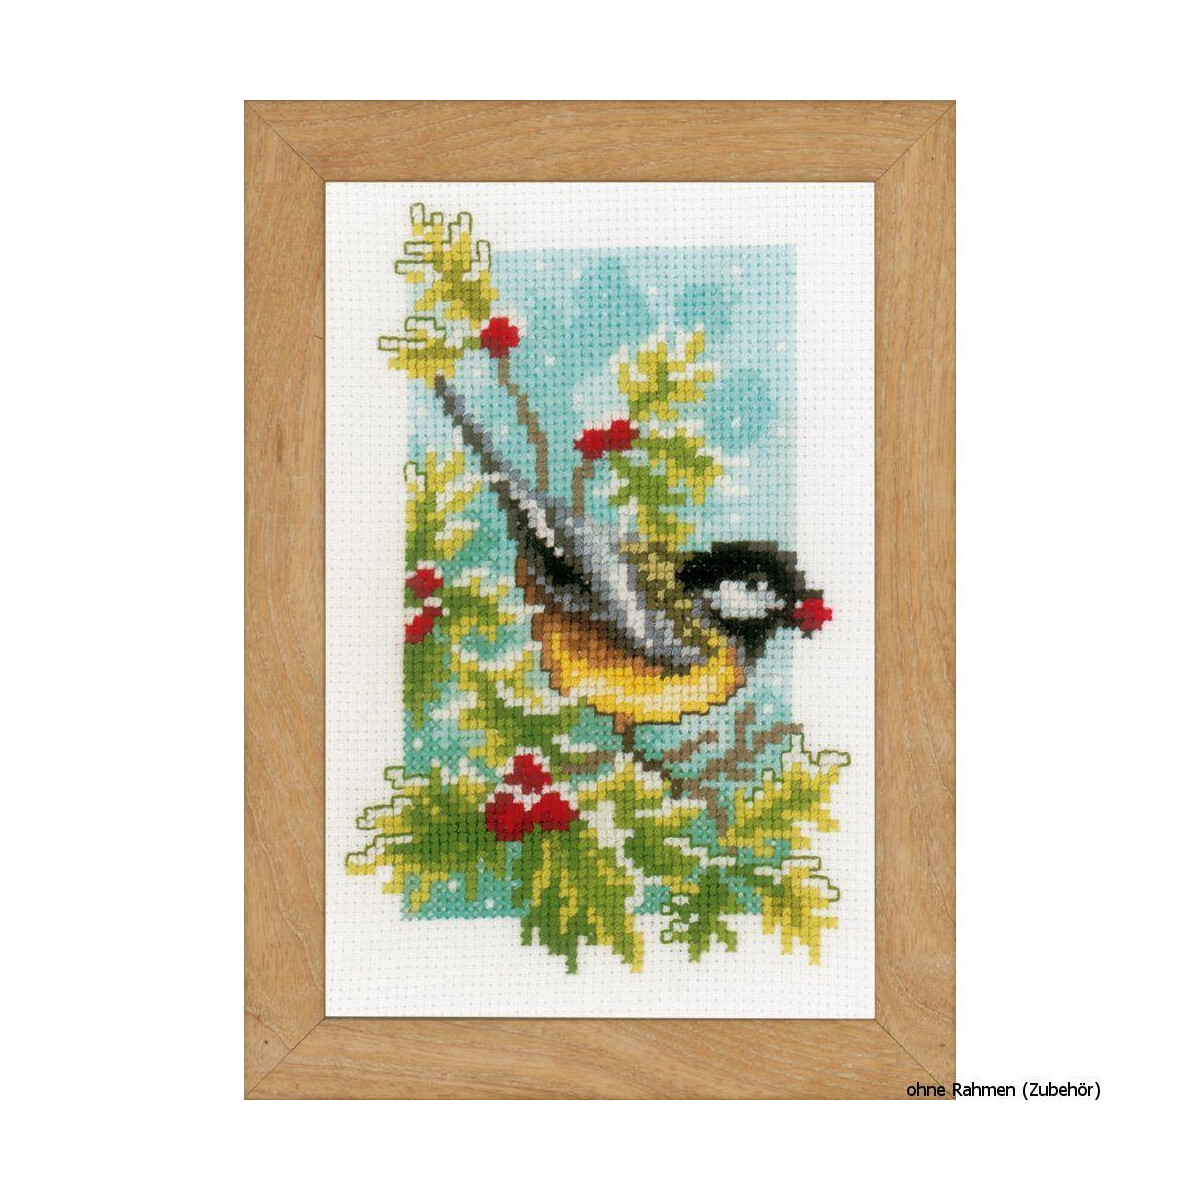 Vervaco Miniature counted cross stitch kit Four seasons...